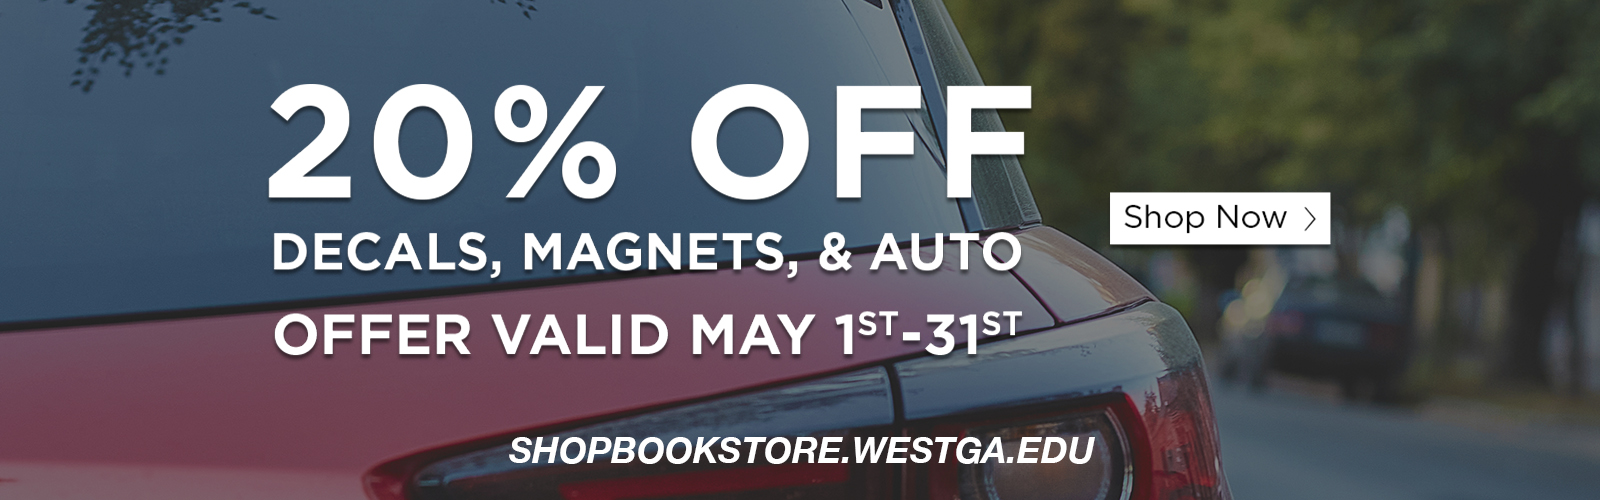 20% off decals, magnets, and auto through May 31st on shopbookstore@westga.edu .